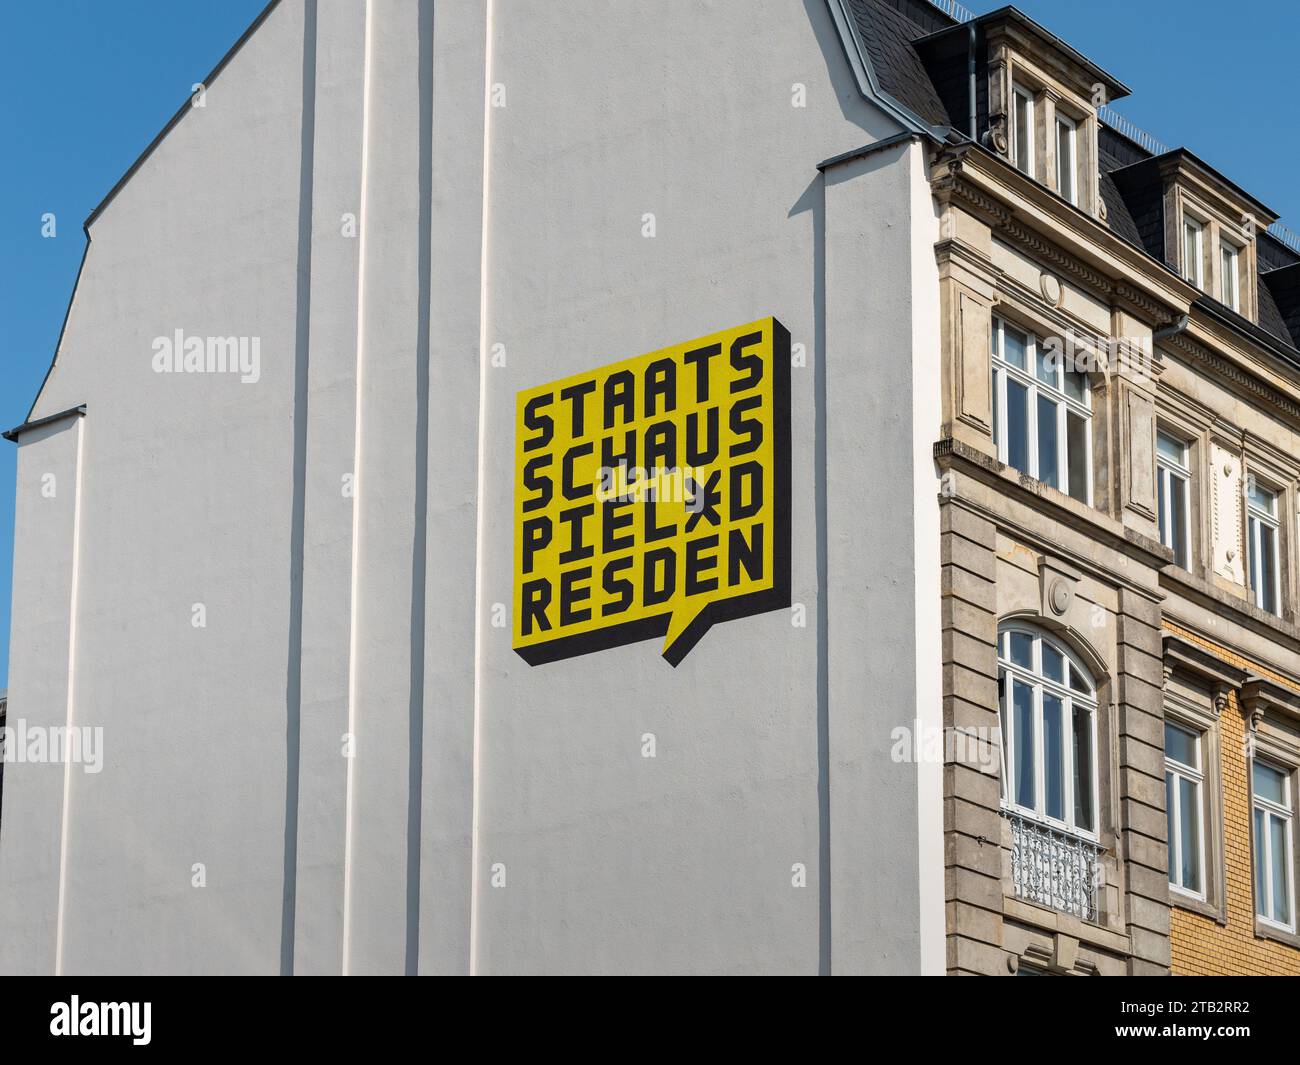 Staatsschauspiel Dresden logo sign on the facade of the 'Kleines Haus' (small house). Building exterior of a famous traditional theater in Saxony. Stock Photo